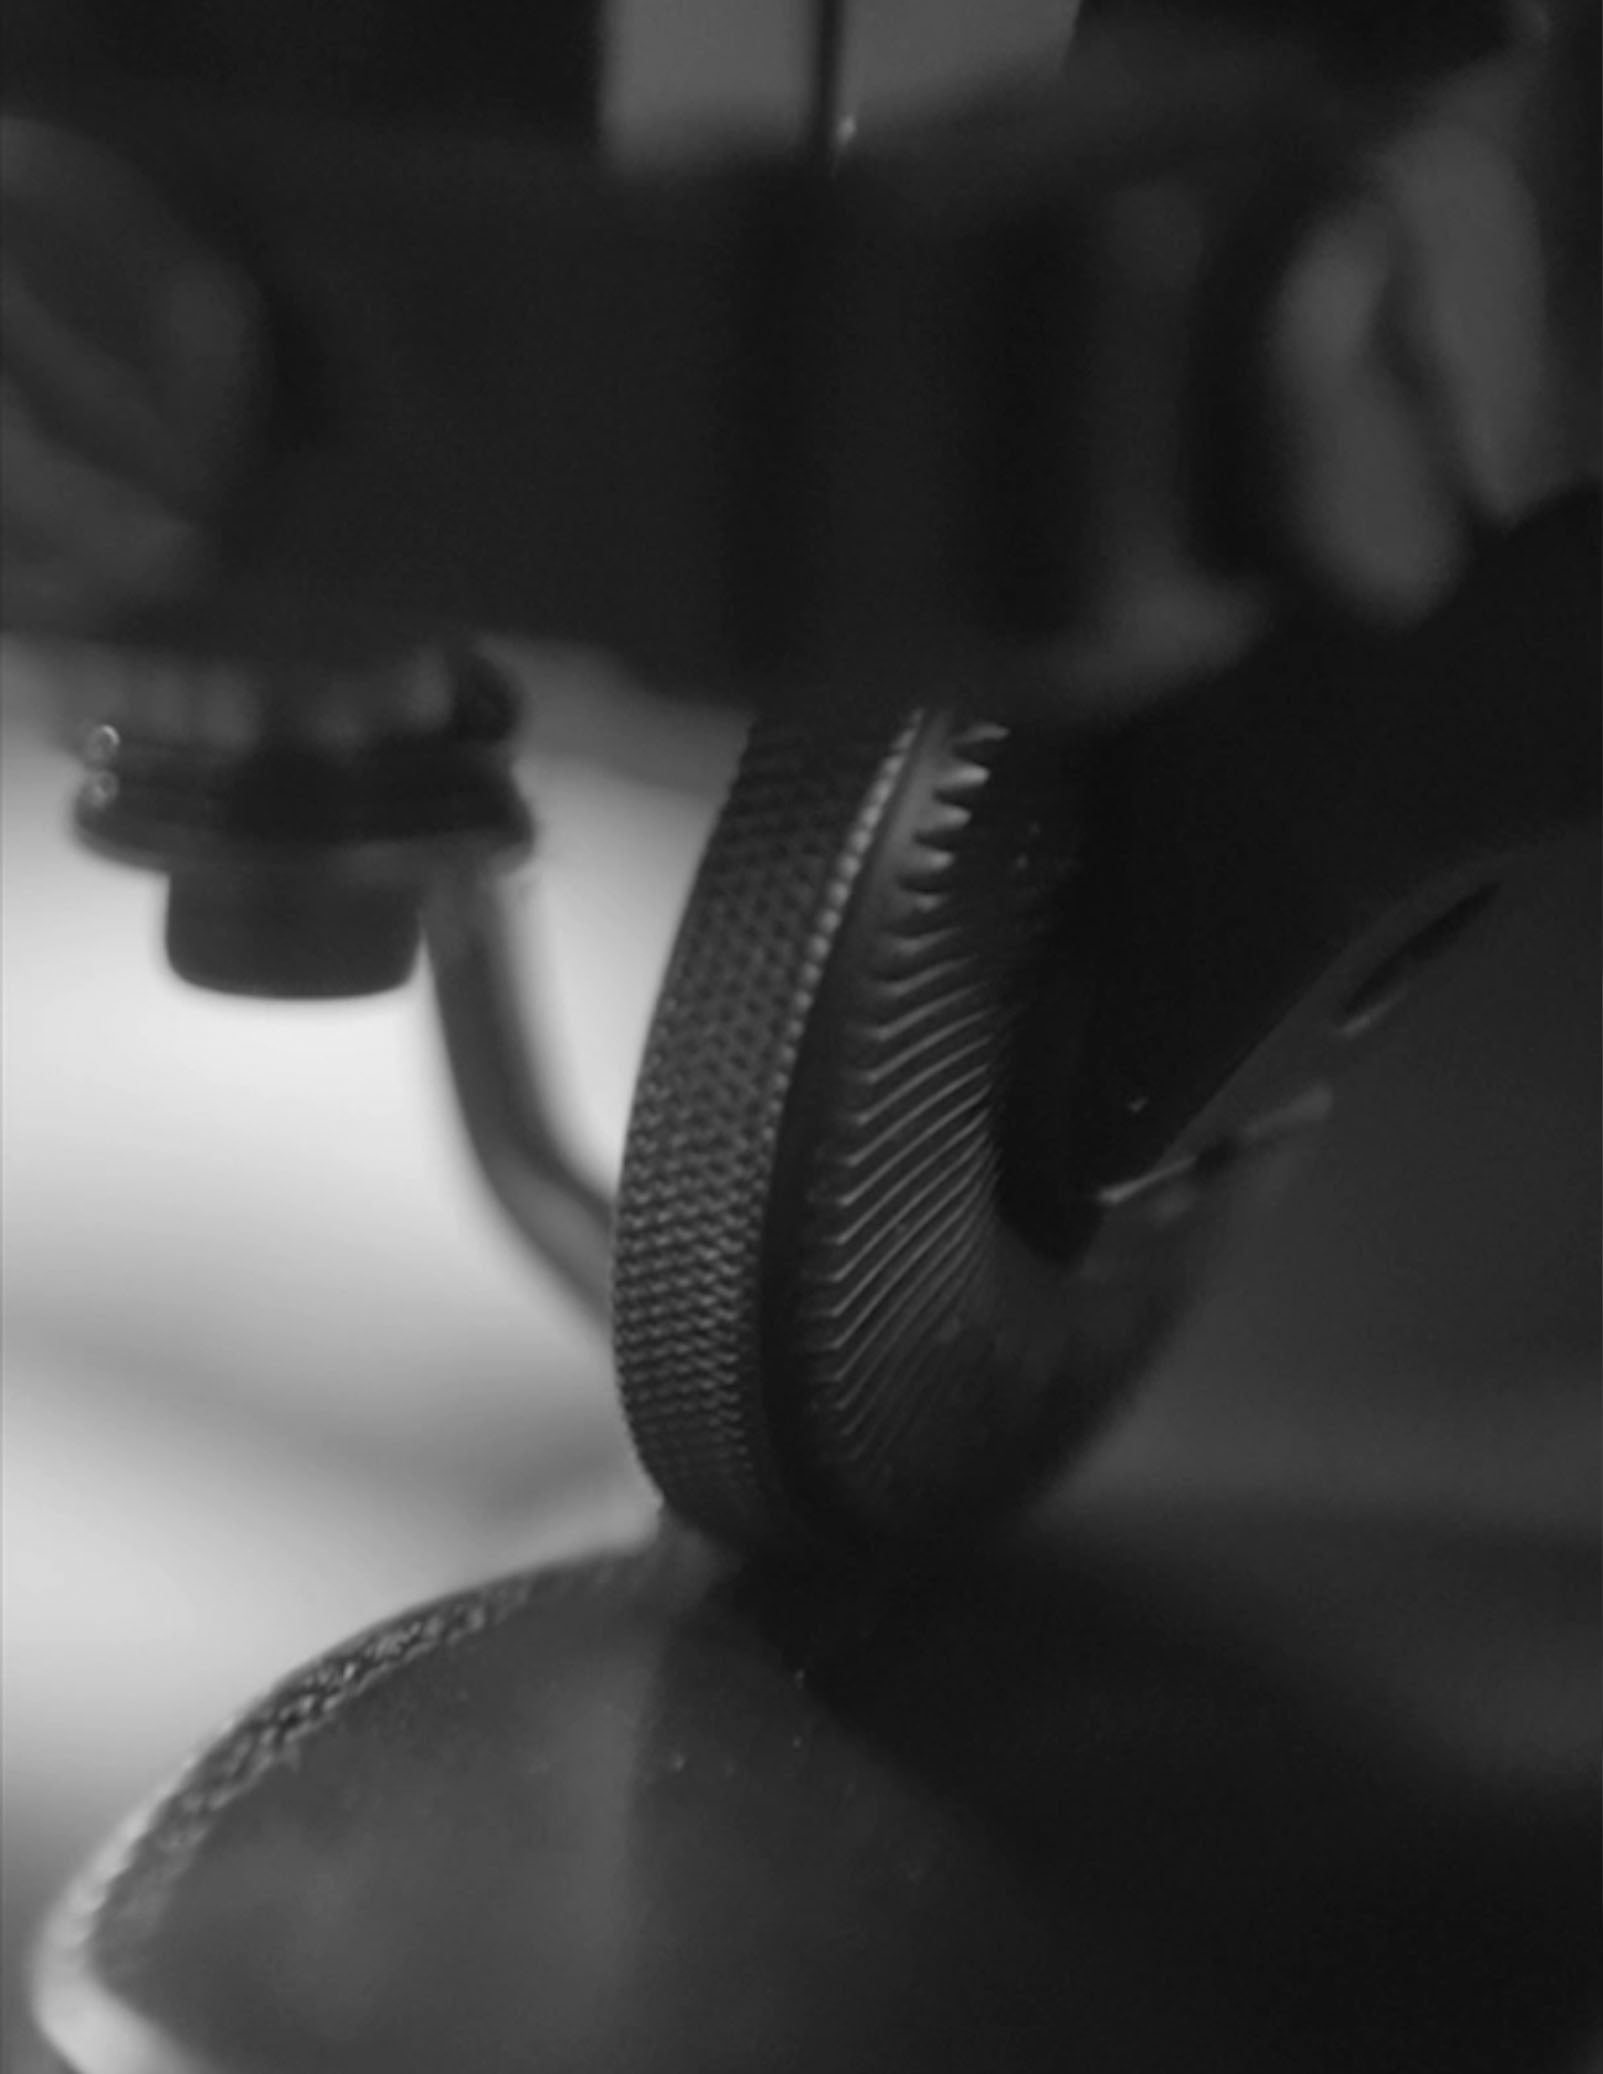 Close up of a sewing machine stitching a piece of leather